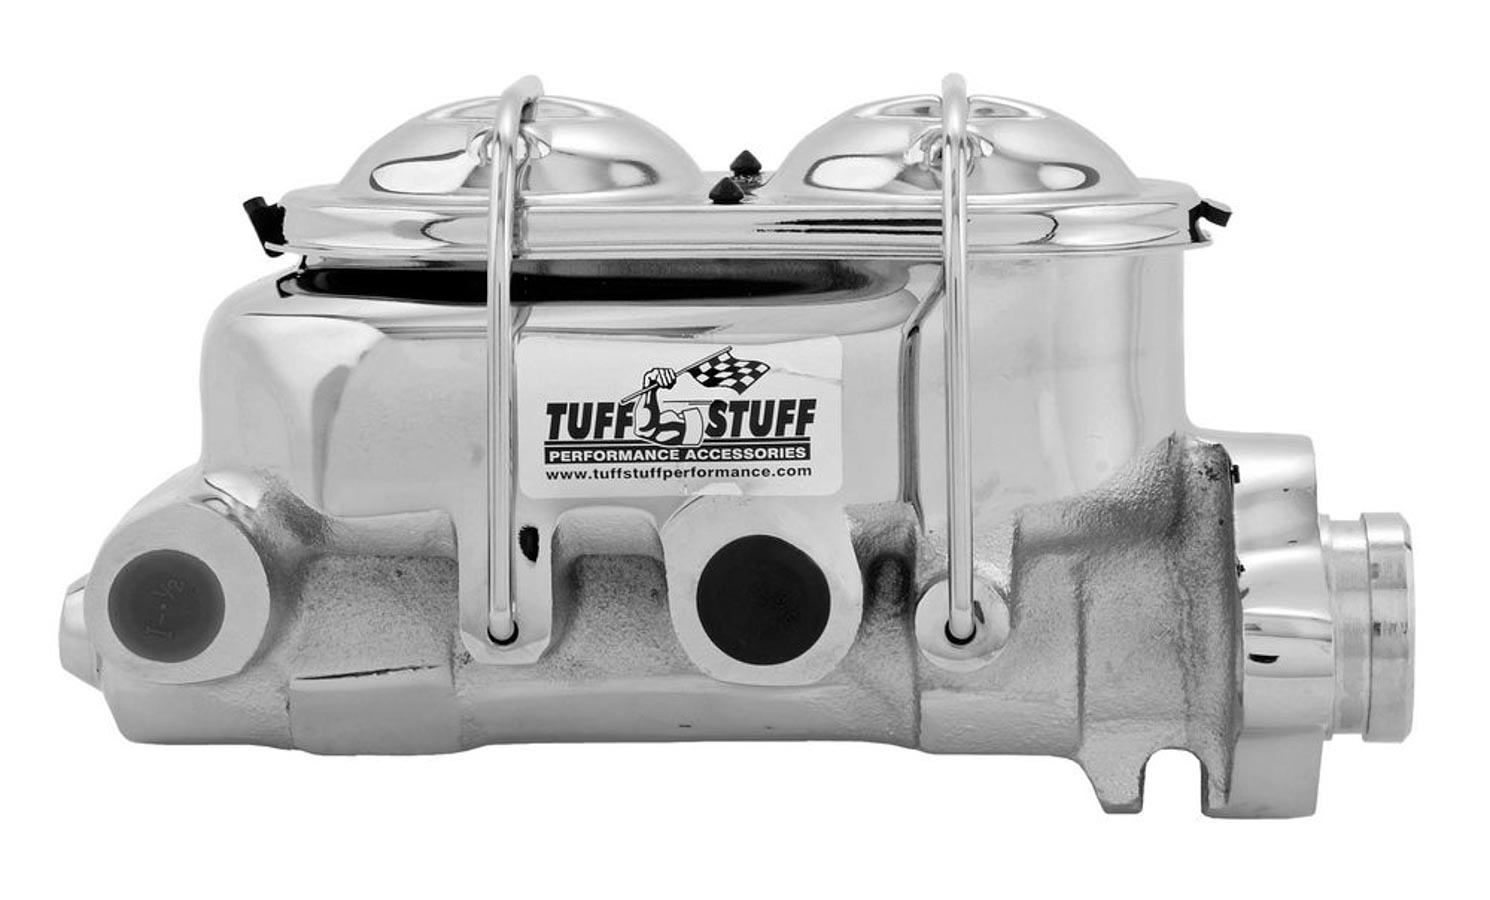 Tuff Stuff 2071NA Master Cylinder, Smoothie, 1-1/8 in Bore, Integral Reservoir, Iron, Chrome, 3-1/4 in Flange Mount, Kit